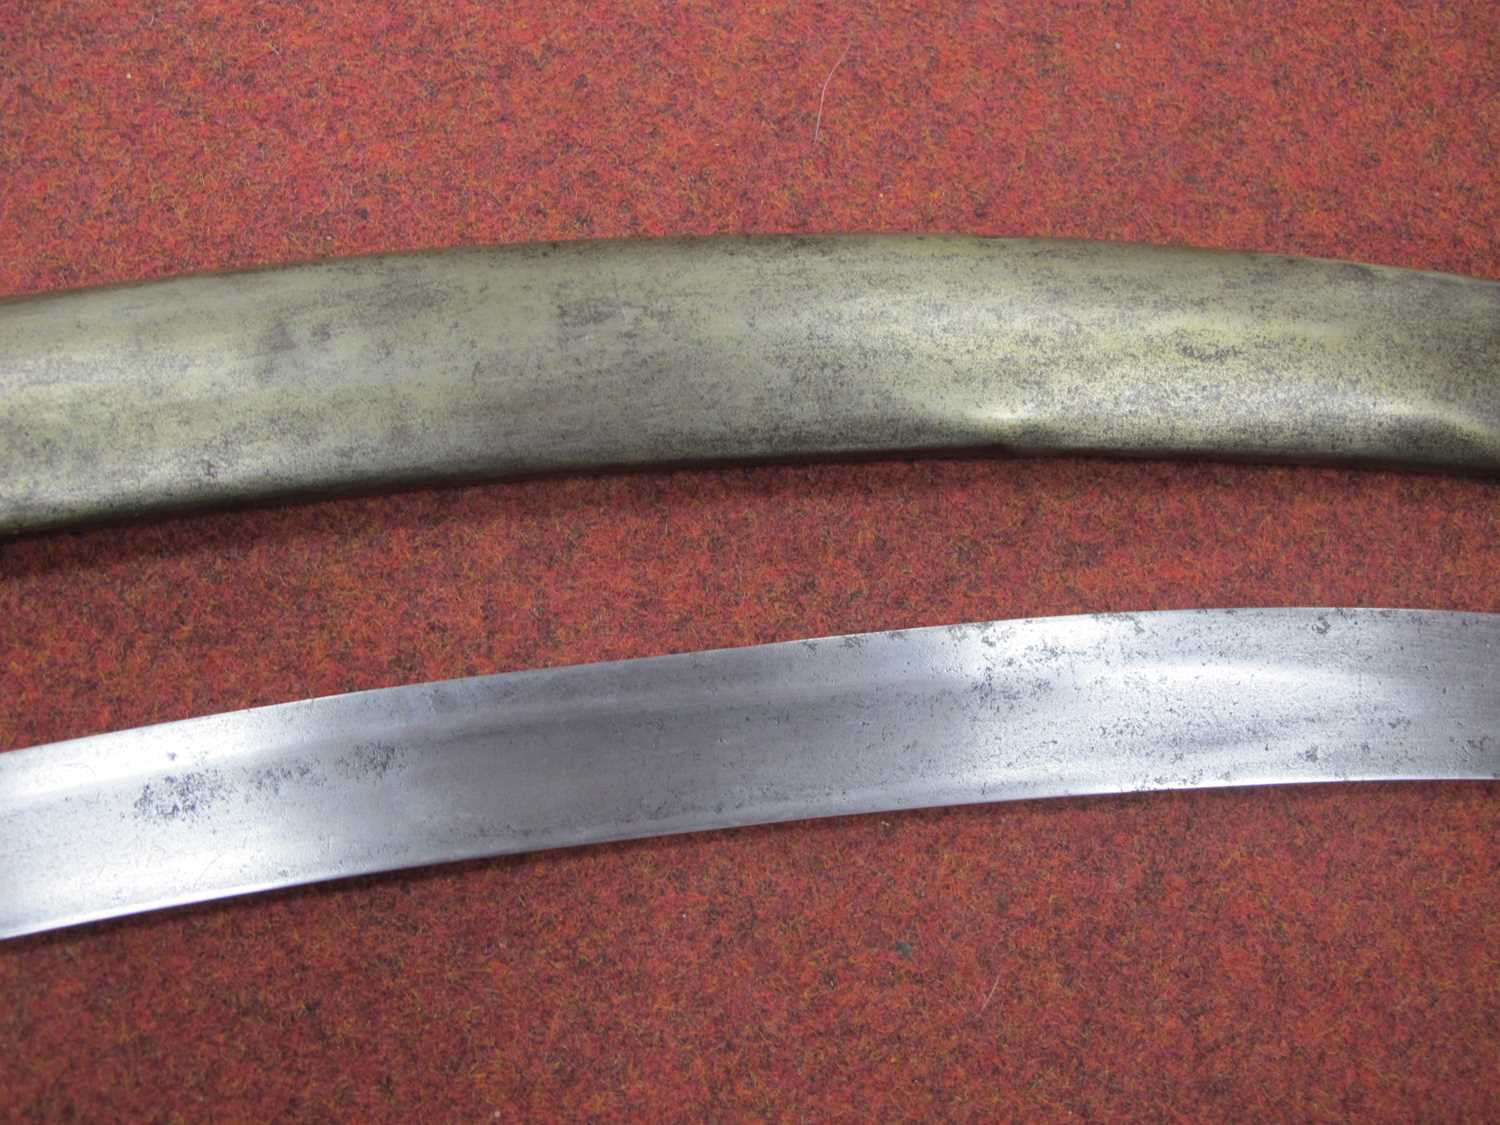 Light Cavalry Type Sabre and Scabbard, with possible modification replacement of grip and guard, - Image 10 of 20